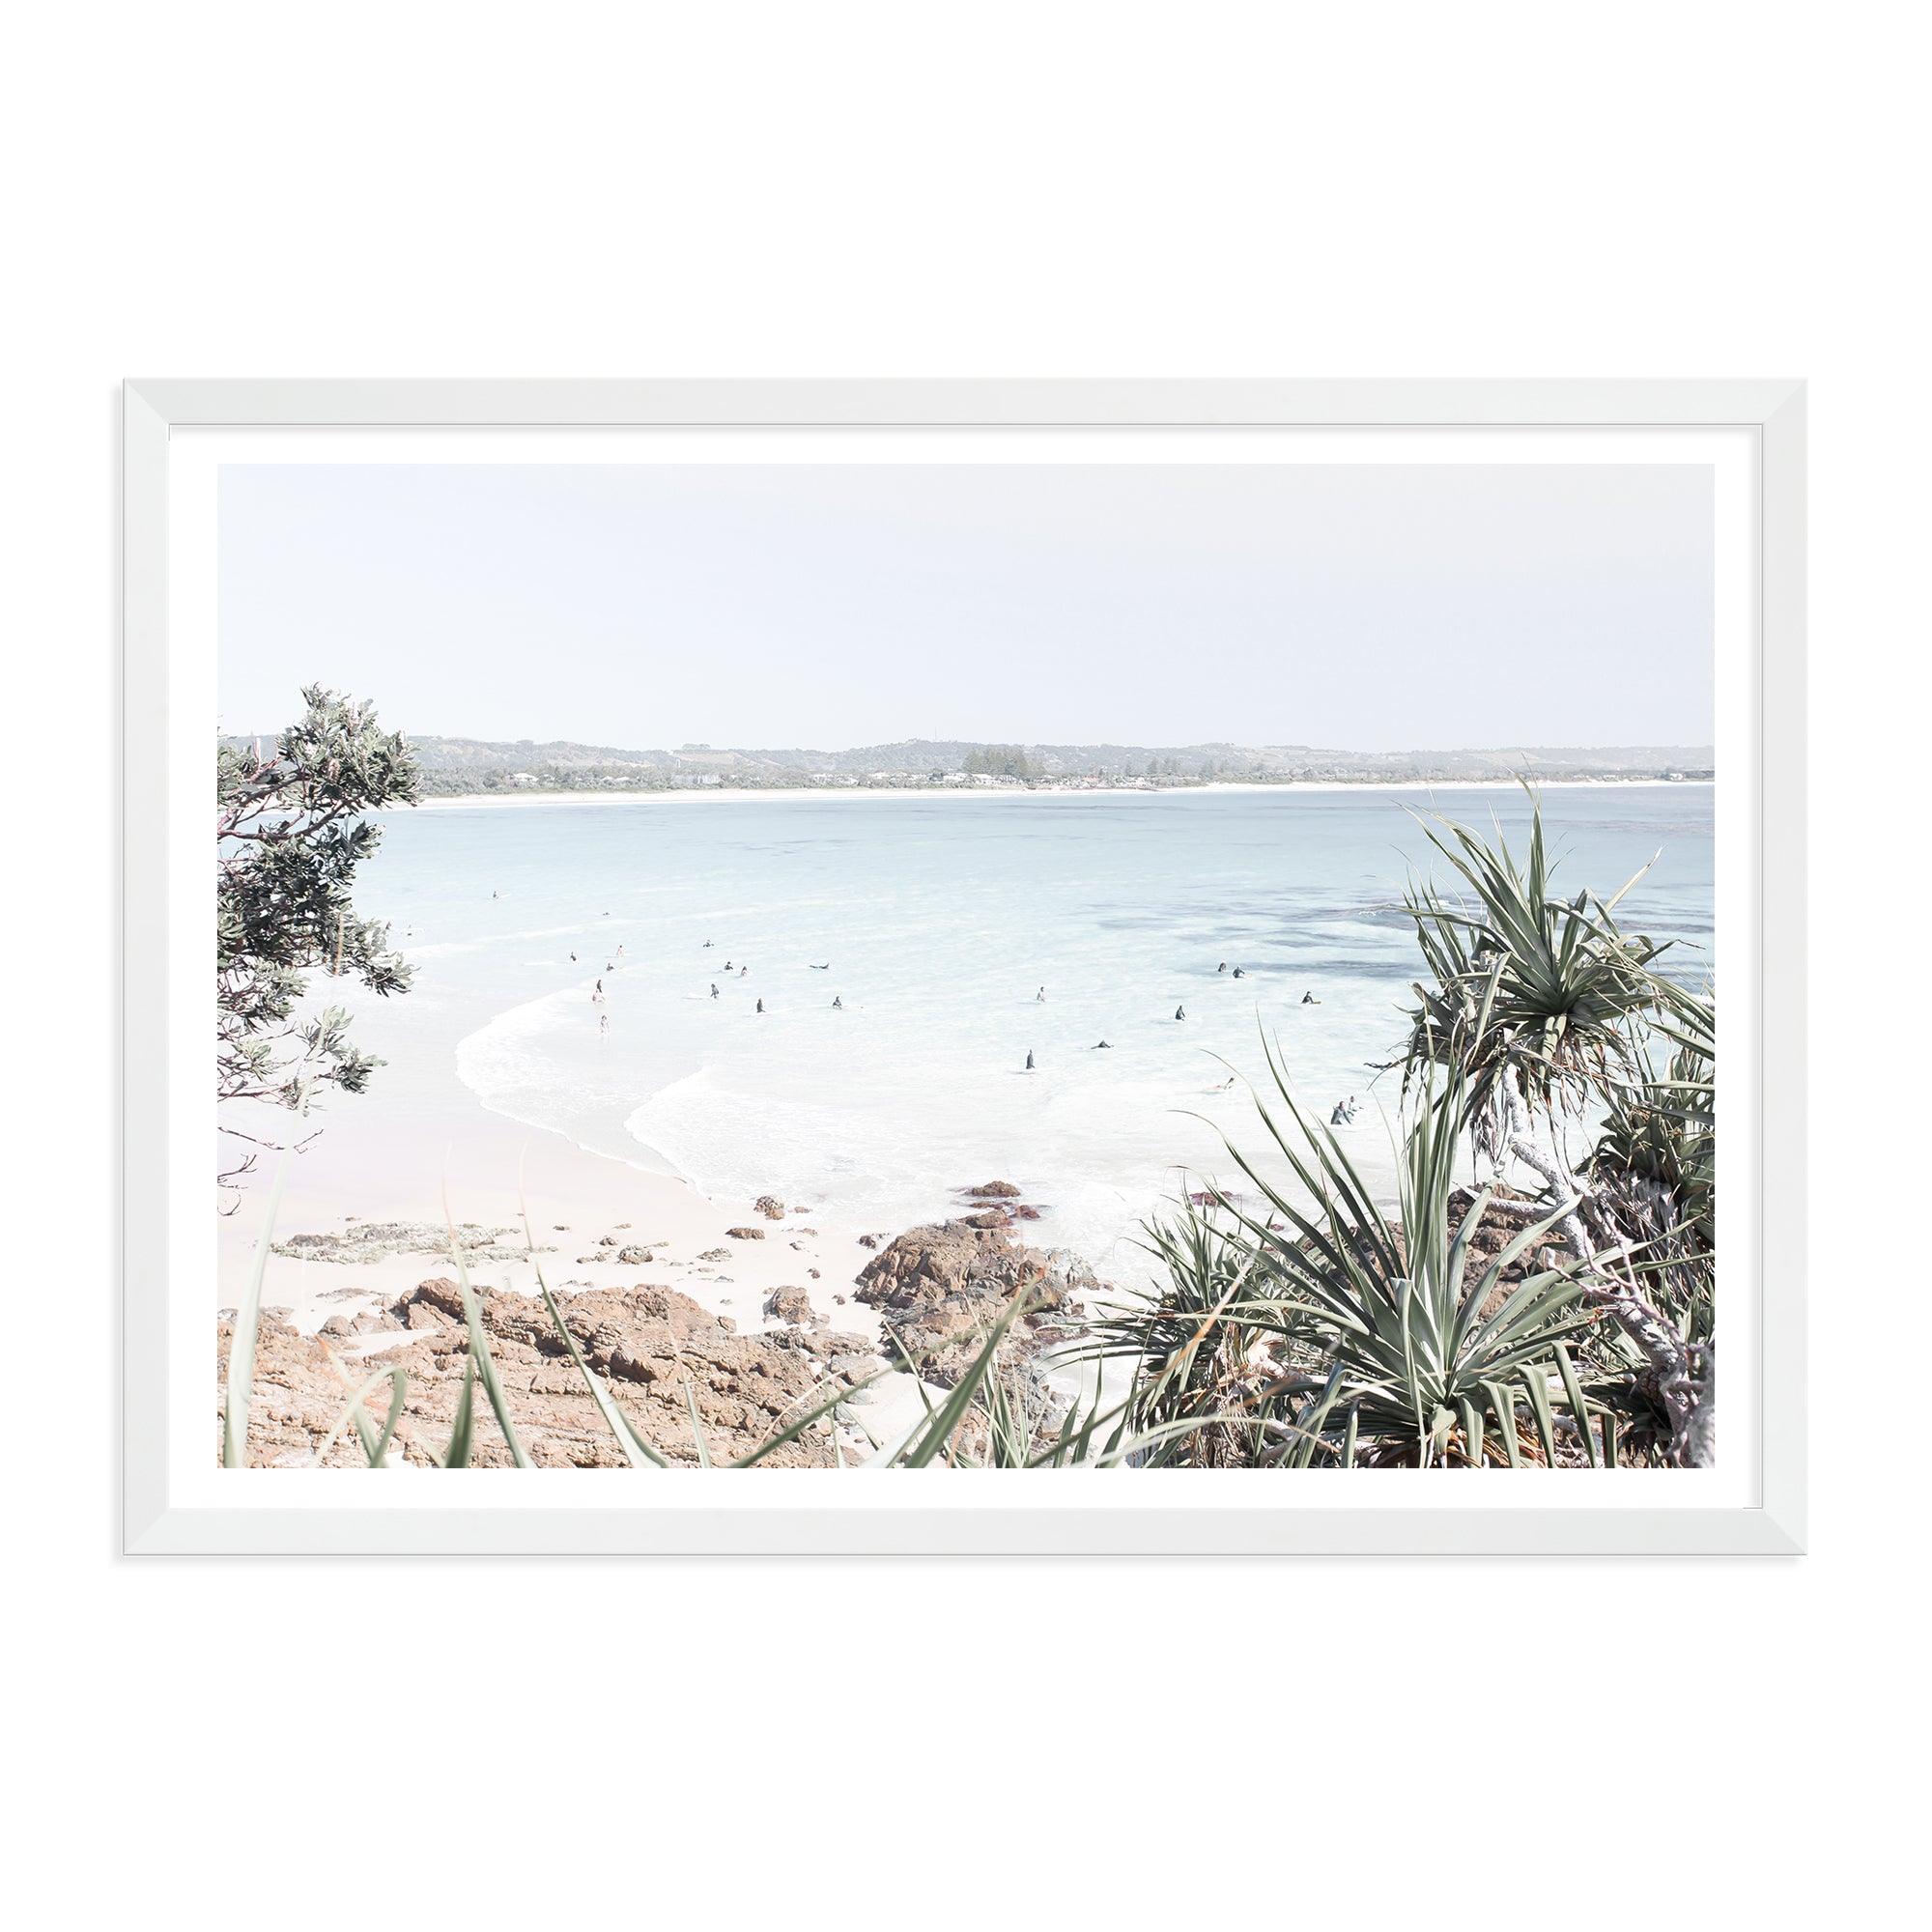 A coastal photographic artprint of Watego Beach in Byron Bay featuring surfers in the blue waves, available framed on unframed of Australian Surf Beach B.